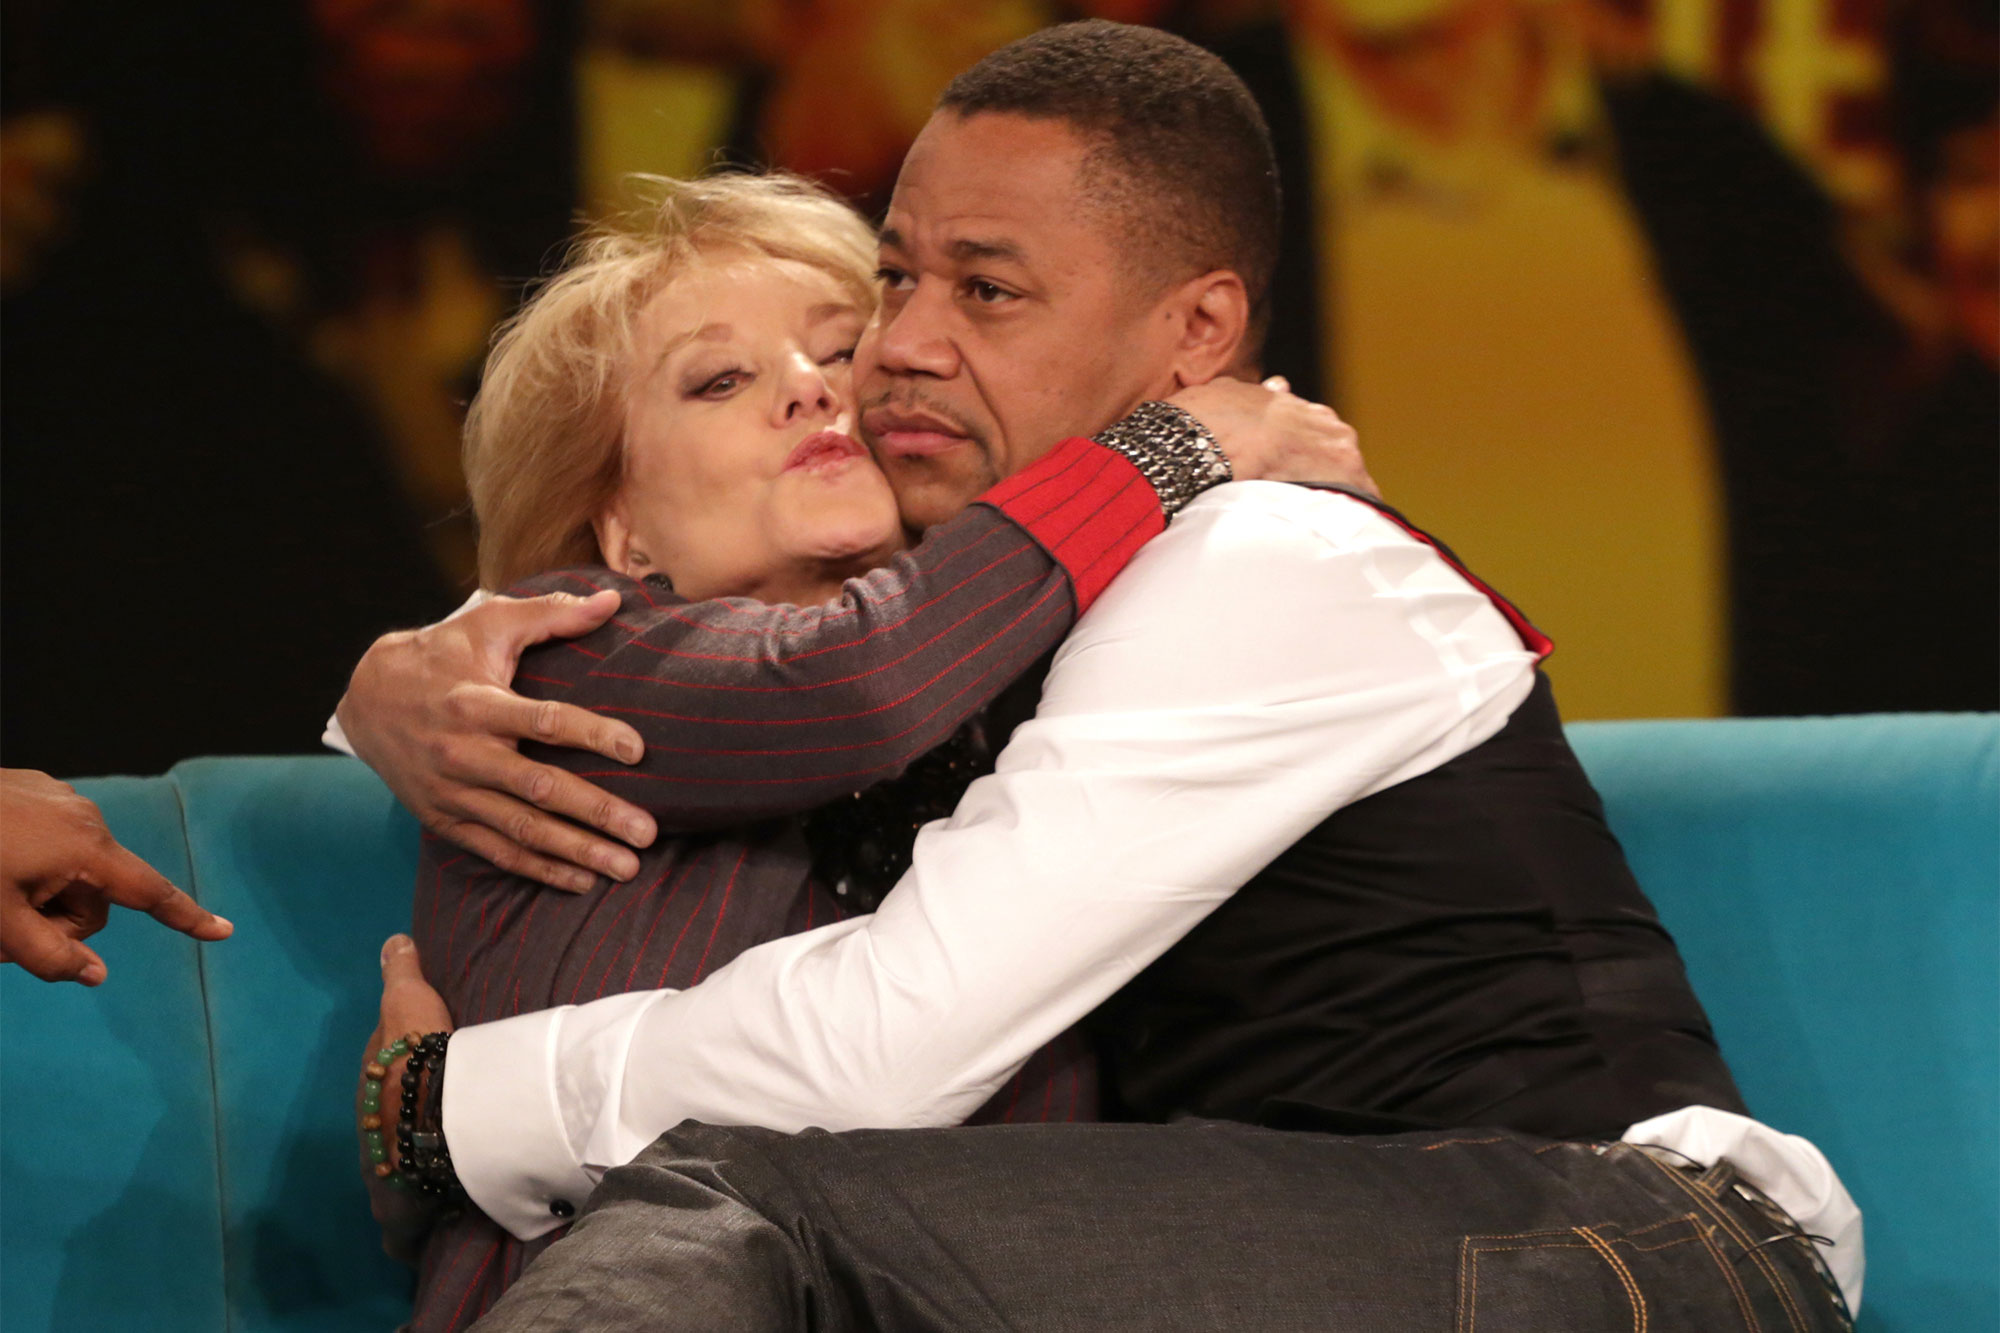 Barbara Walters and Cuba Gooding Jr. on "The View"